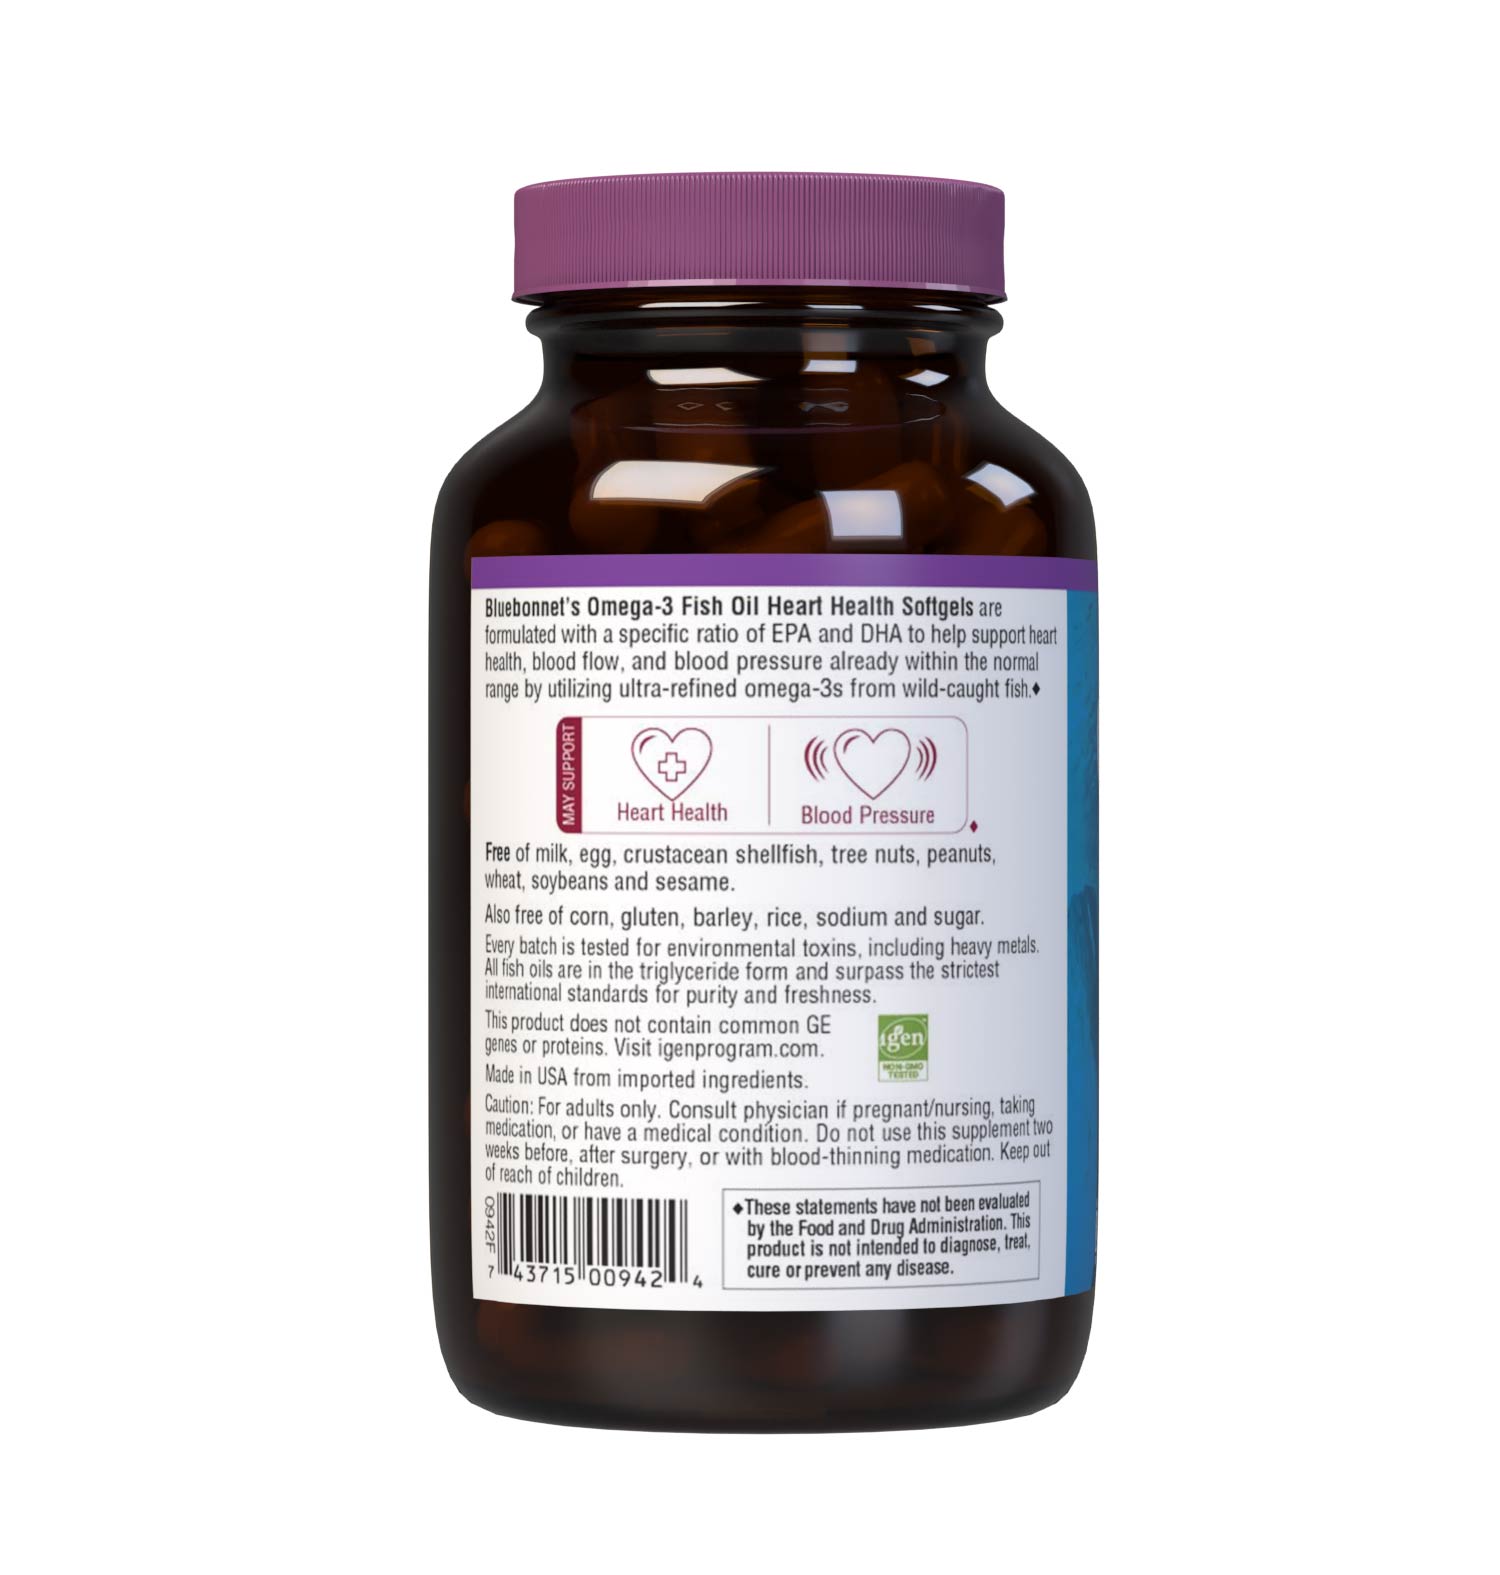 Bluebonnet’s Omega-3 Fish Oil Heart Health 60 Softgels are formulated with a specific ratio of EPA and DHA to help support heart function, blood flow, and blood pressure within the normal range by utilizing ultra-refined omega-3s from wild-caught fish. Description panel. #size_60 count